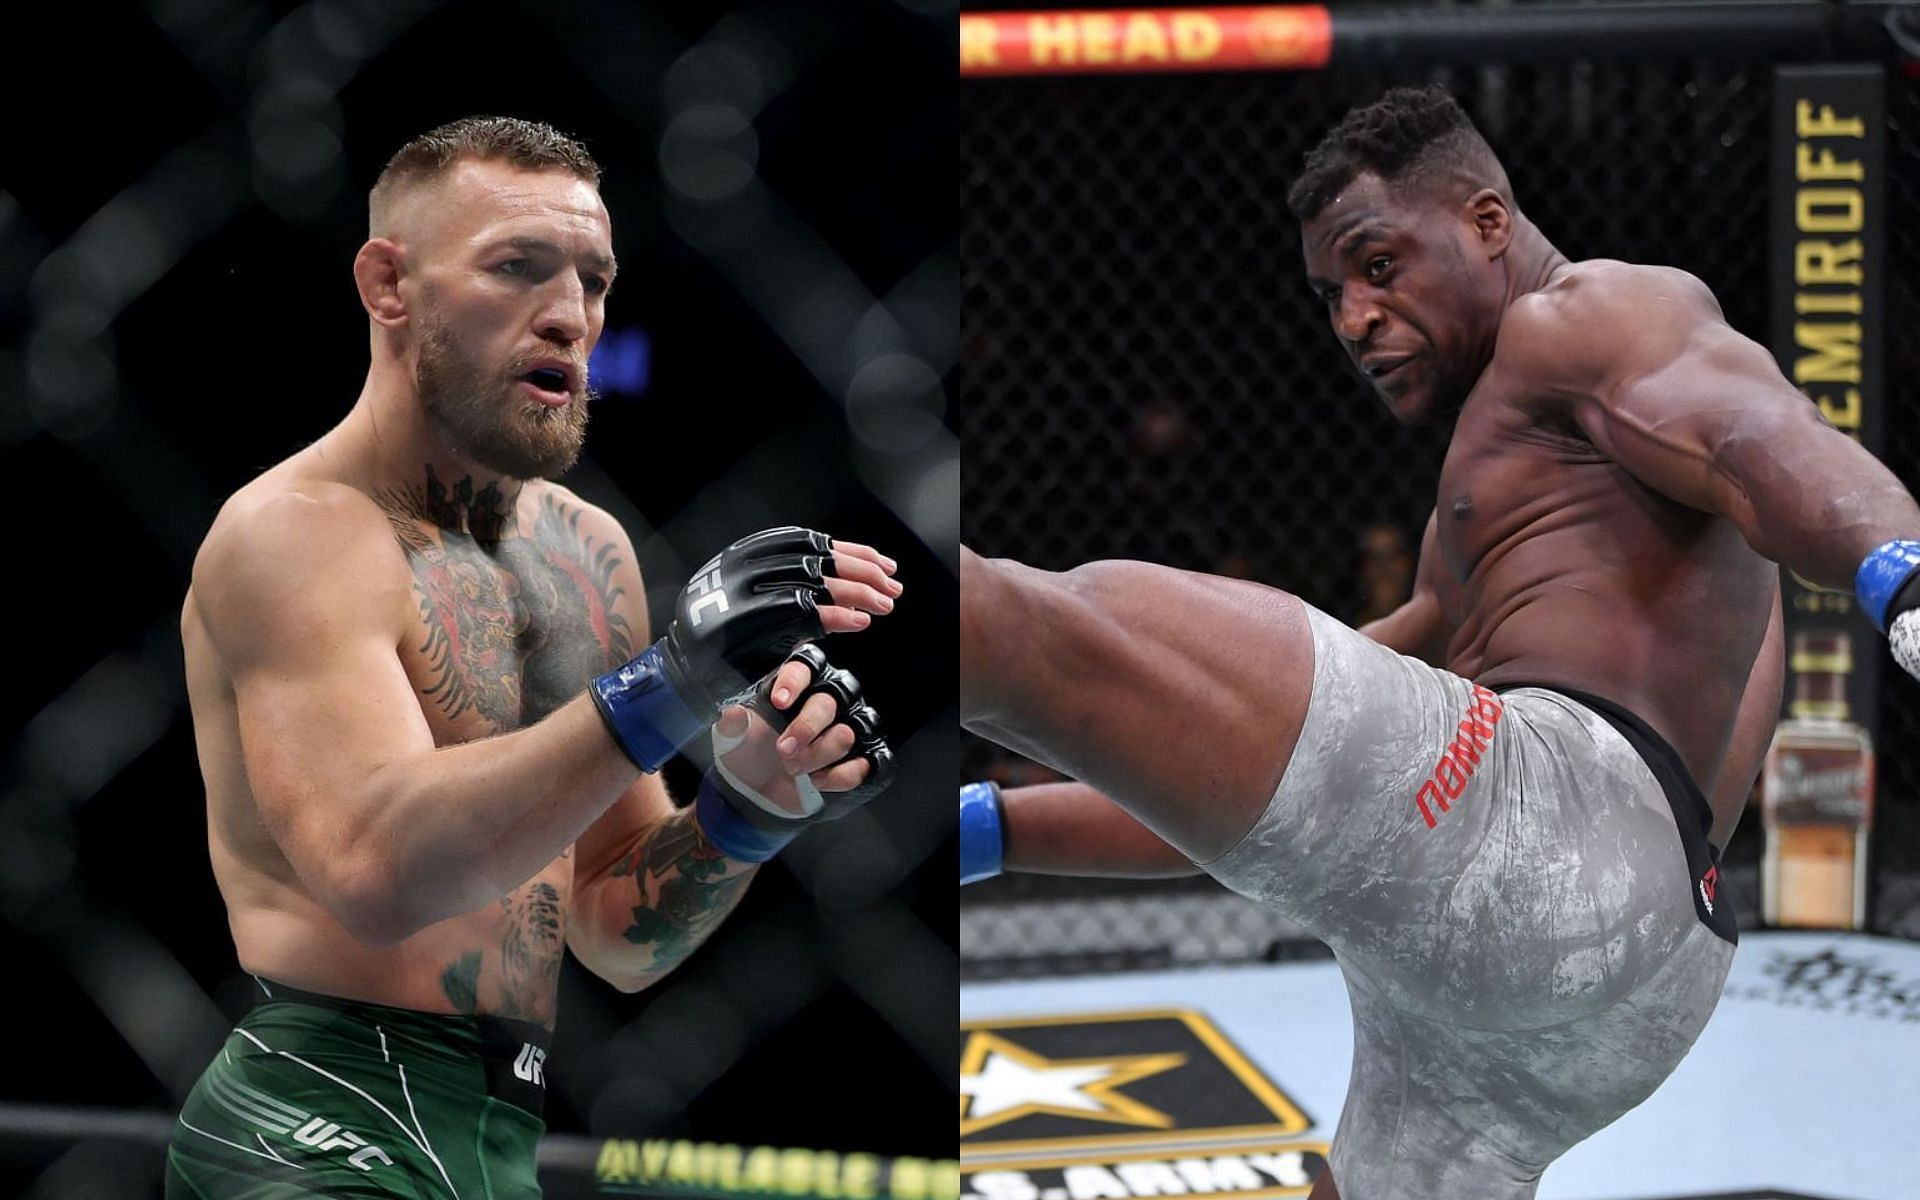 Conor McGregor has more knockdowns per 15 minutes in the UFC than Francis Ngannou